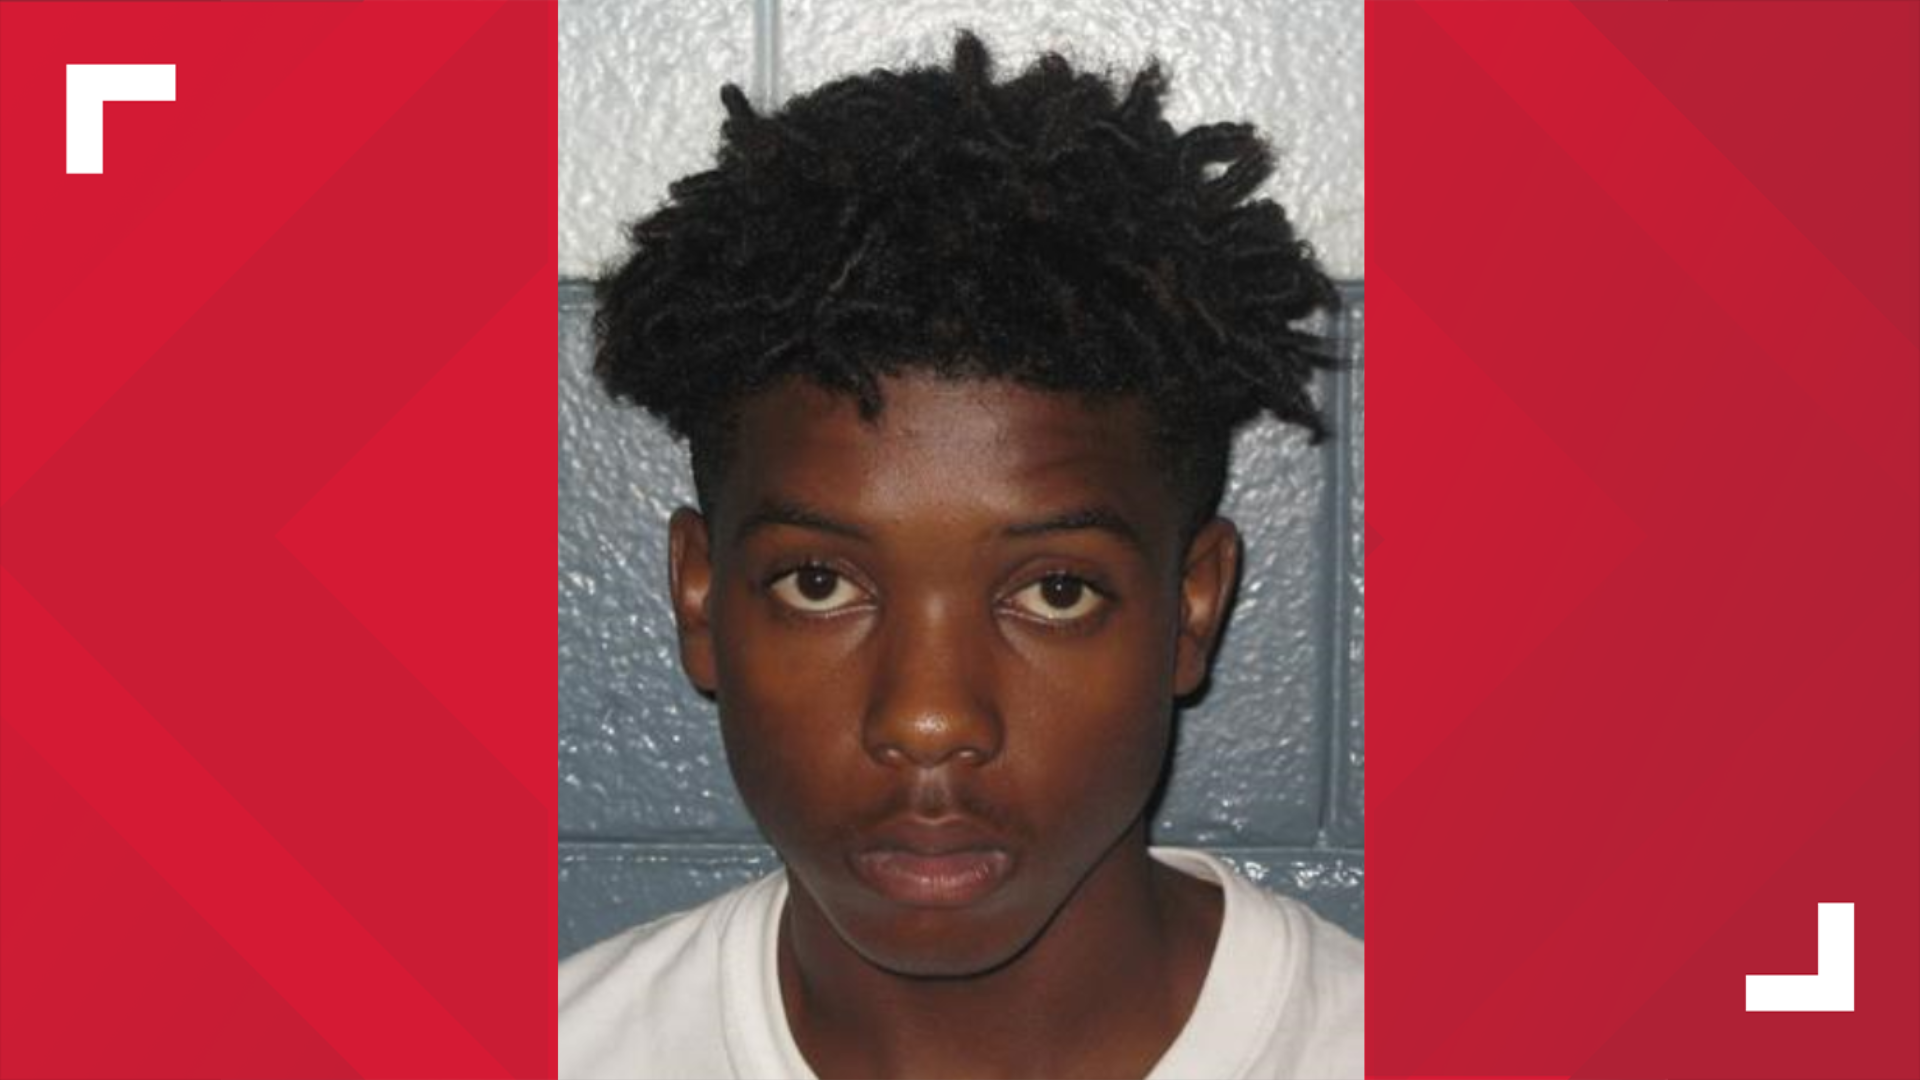 17-year-old Jermontae Moss was sentenced to life in prison in 2012 after killing a store owner during an attempted robbery